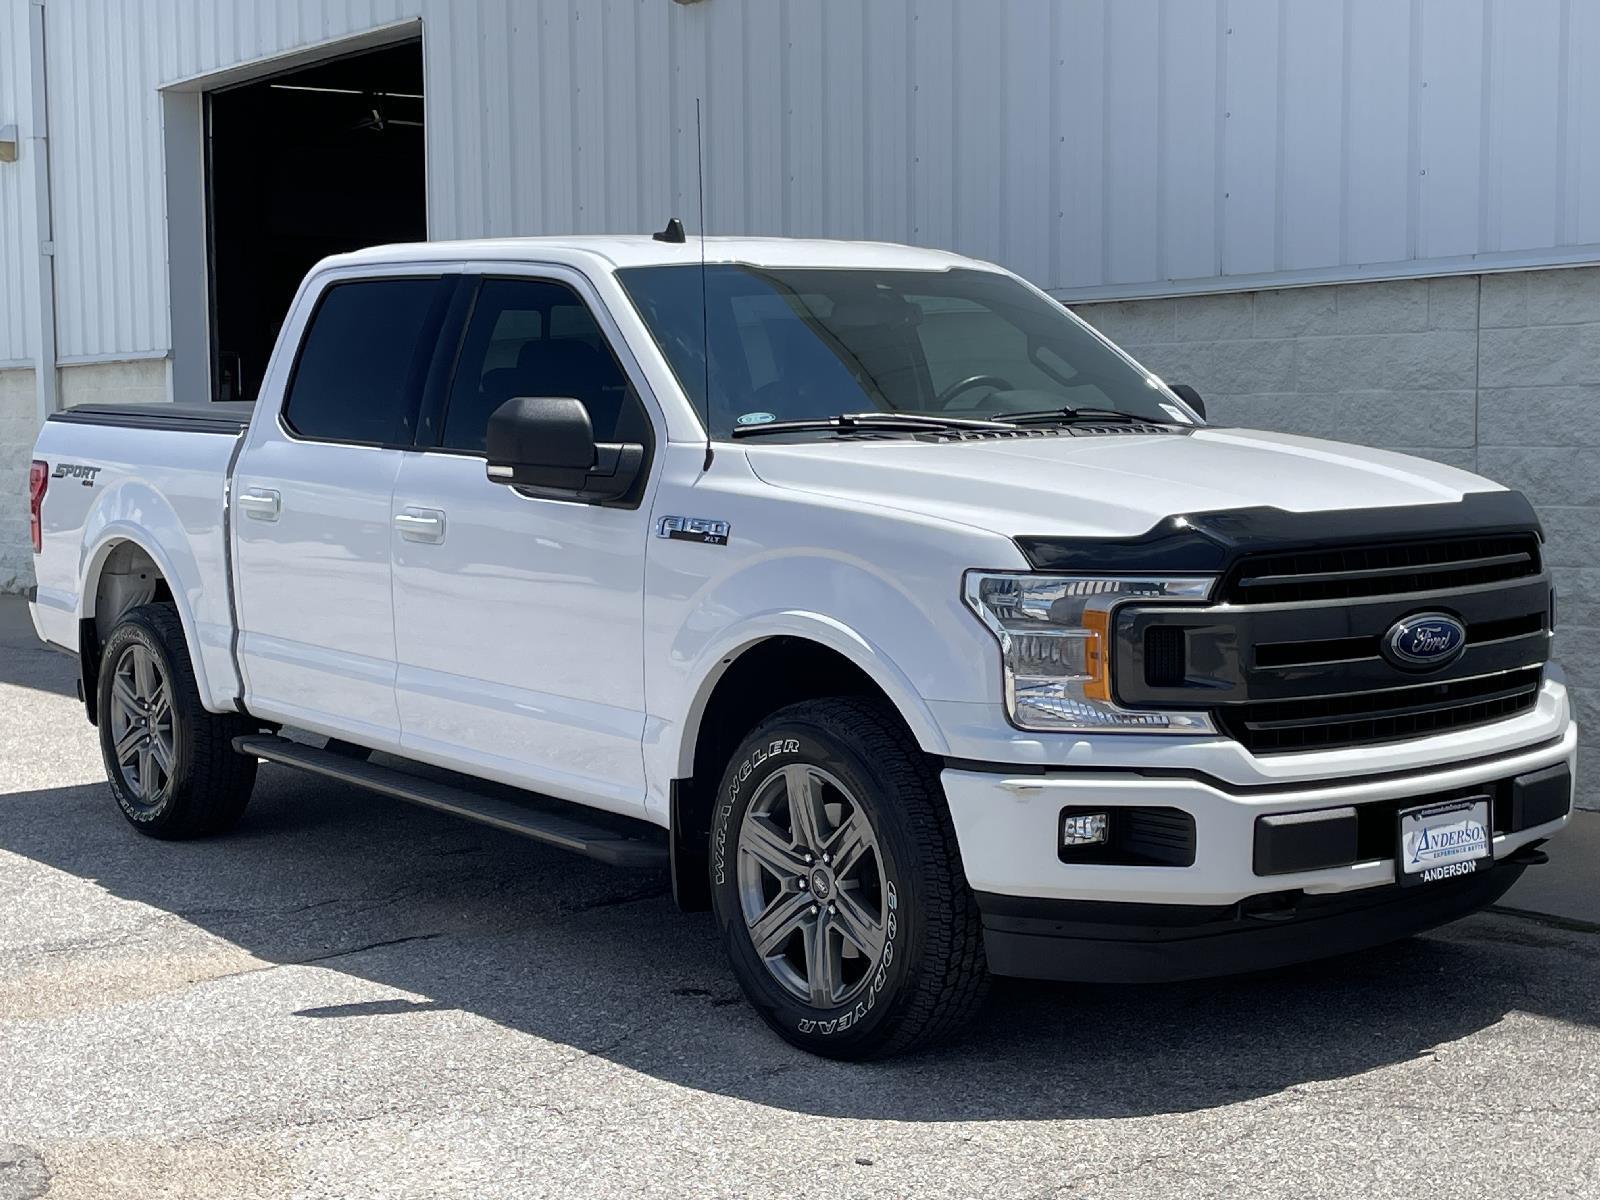 Used 2020 Ford F-150 XLT Crew Cab Truck for sale in Lincoln NE